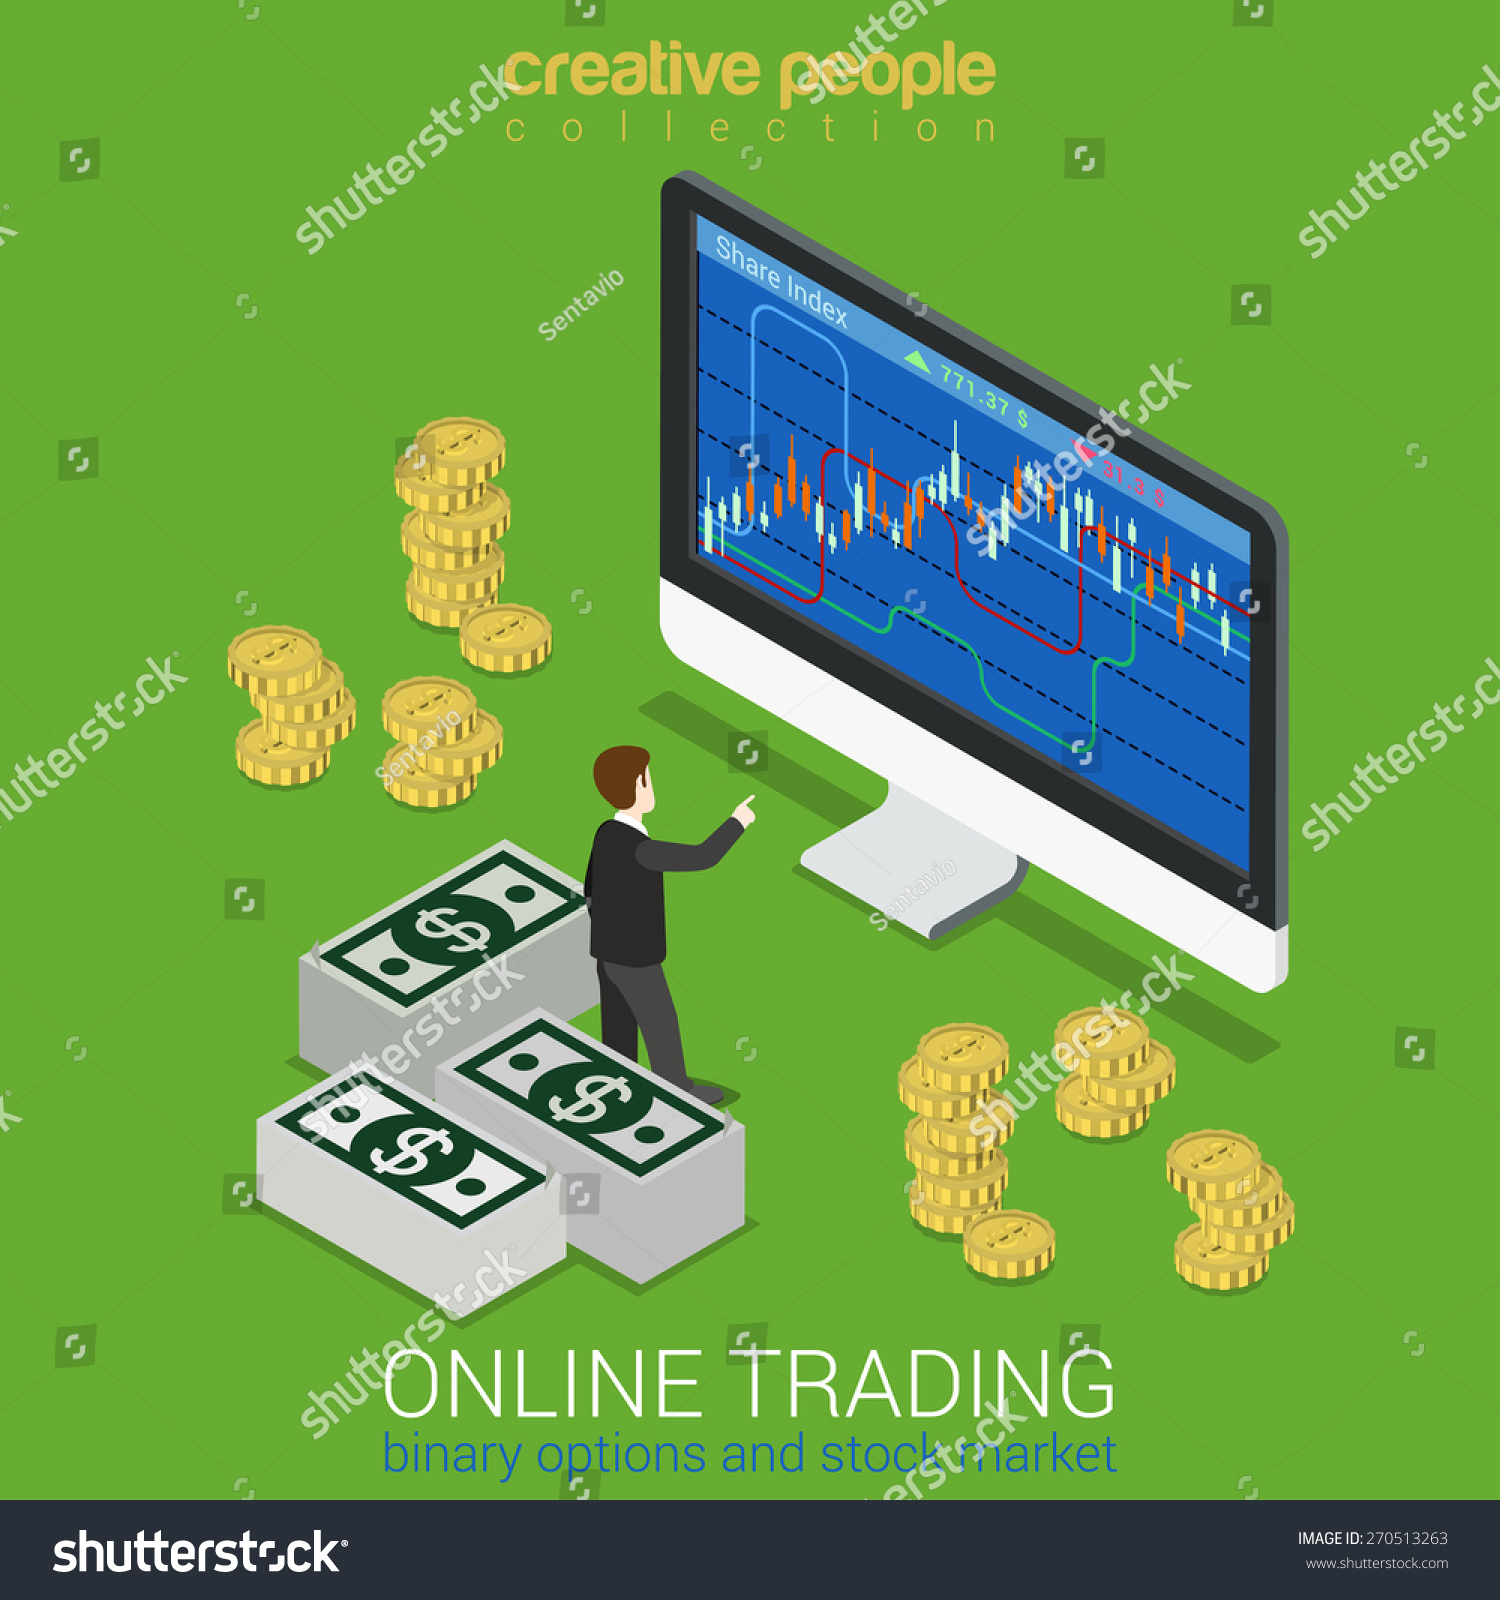 Online trading binary options